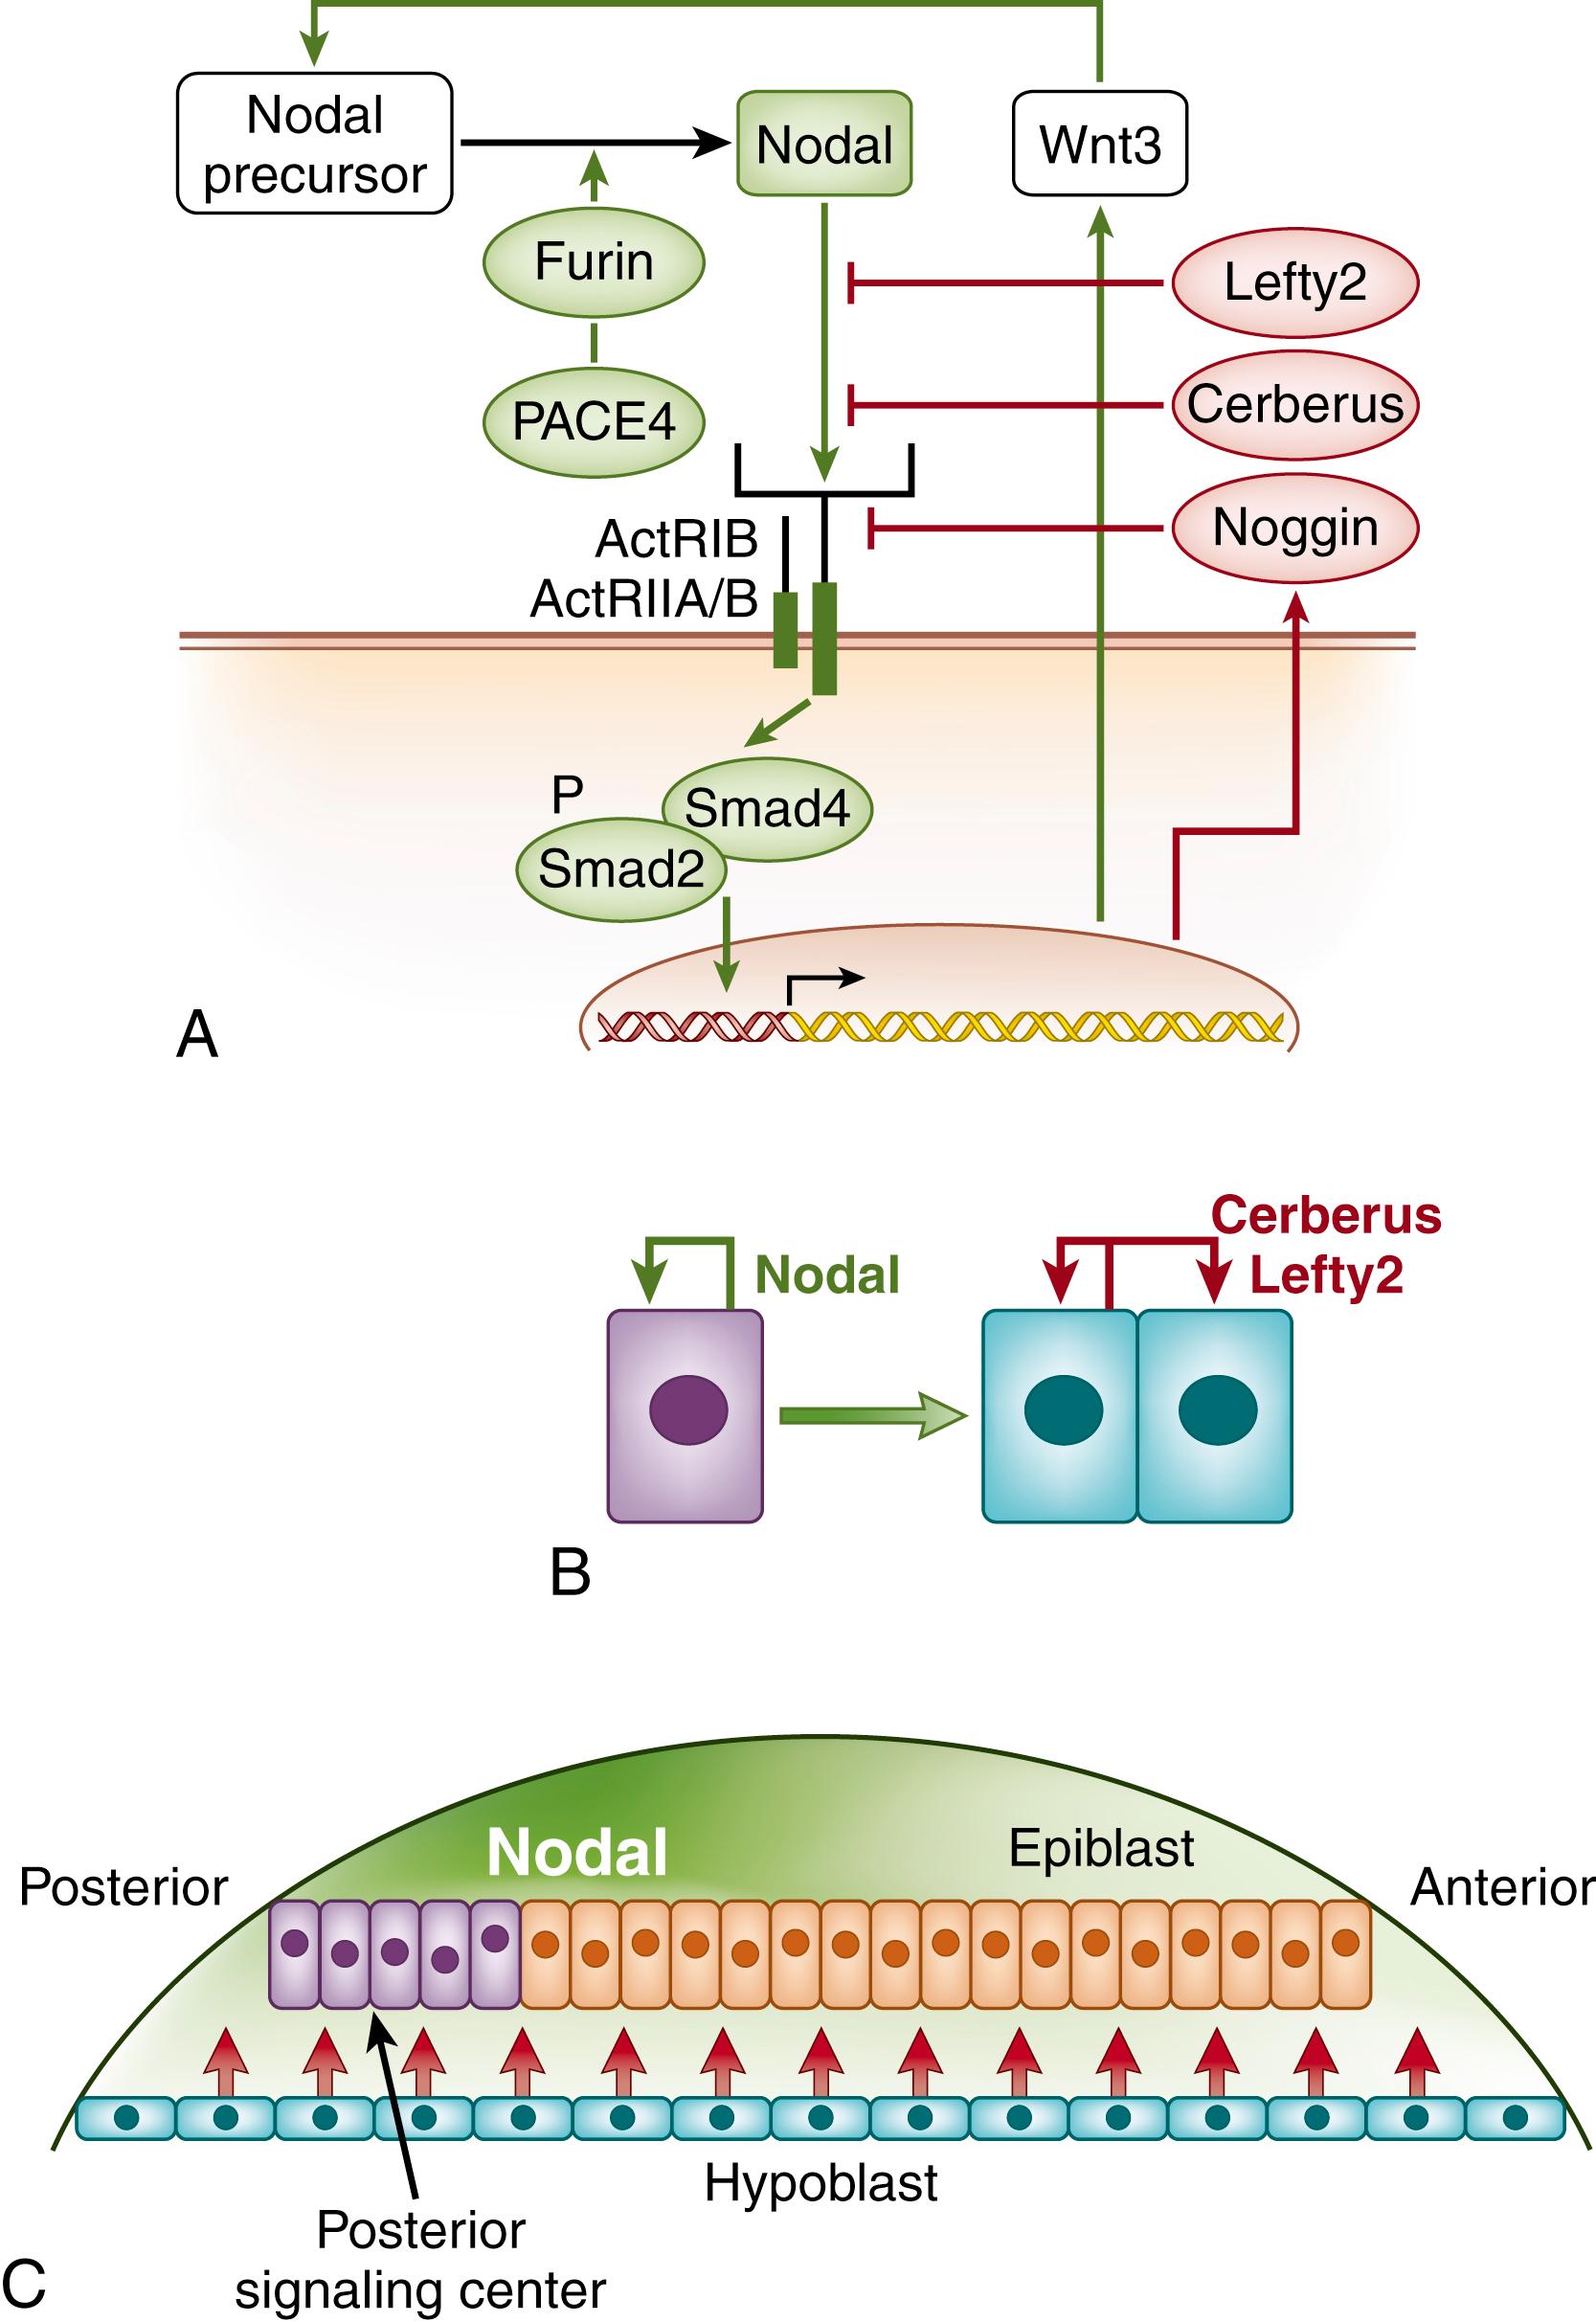 Fig. 4.3, Signaling centers are established by positive and negative feedback. (A) Nodal is a transforming growth factor-β family member that signals through activin type I and II receptors (ActRIB and ActRIIA or ActRIIB). Receptor activation results in the phosphorylation of cytoplasmic Smad3 and Smad4. These then translocate to the nucleus where they bind the promoters of multiple genes. Among the genes induced is Wnt3, which induces Nodal and thereby confers positive feedback on Nodal signaling, and the Nodal inhibitors Lefty2, Cerberus, and Noggin, which represent negative feedback. (B) Nodal effects vary by tissue. Nodal maintains its own expression in the epiblast (purple) but induces the expression of Nodal inhibitors in the hypoblast (light blue) . (C) The combination of these autoactivation and autoinhibitory effects restricts Nodal expression to a signaling center in the posterior epiblast.